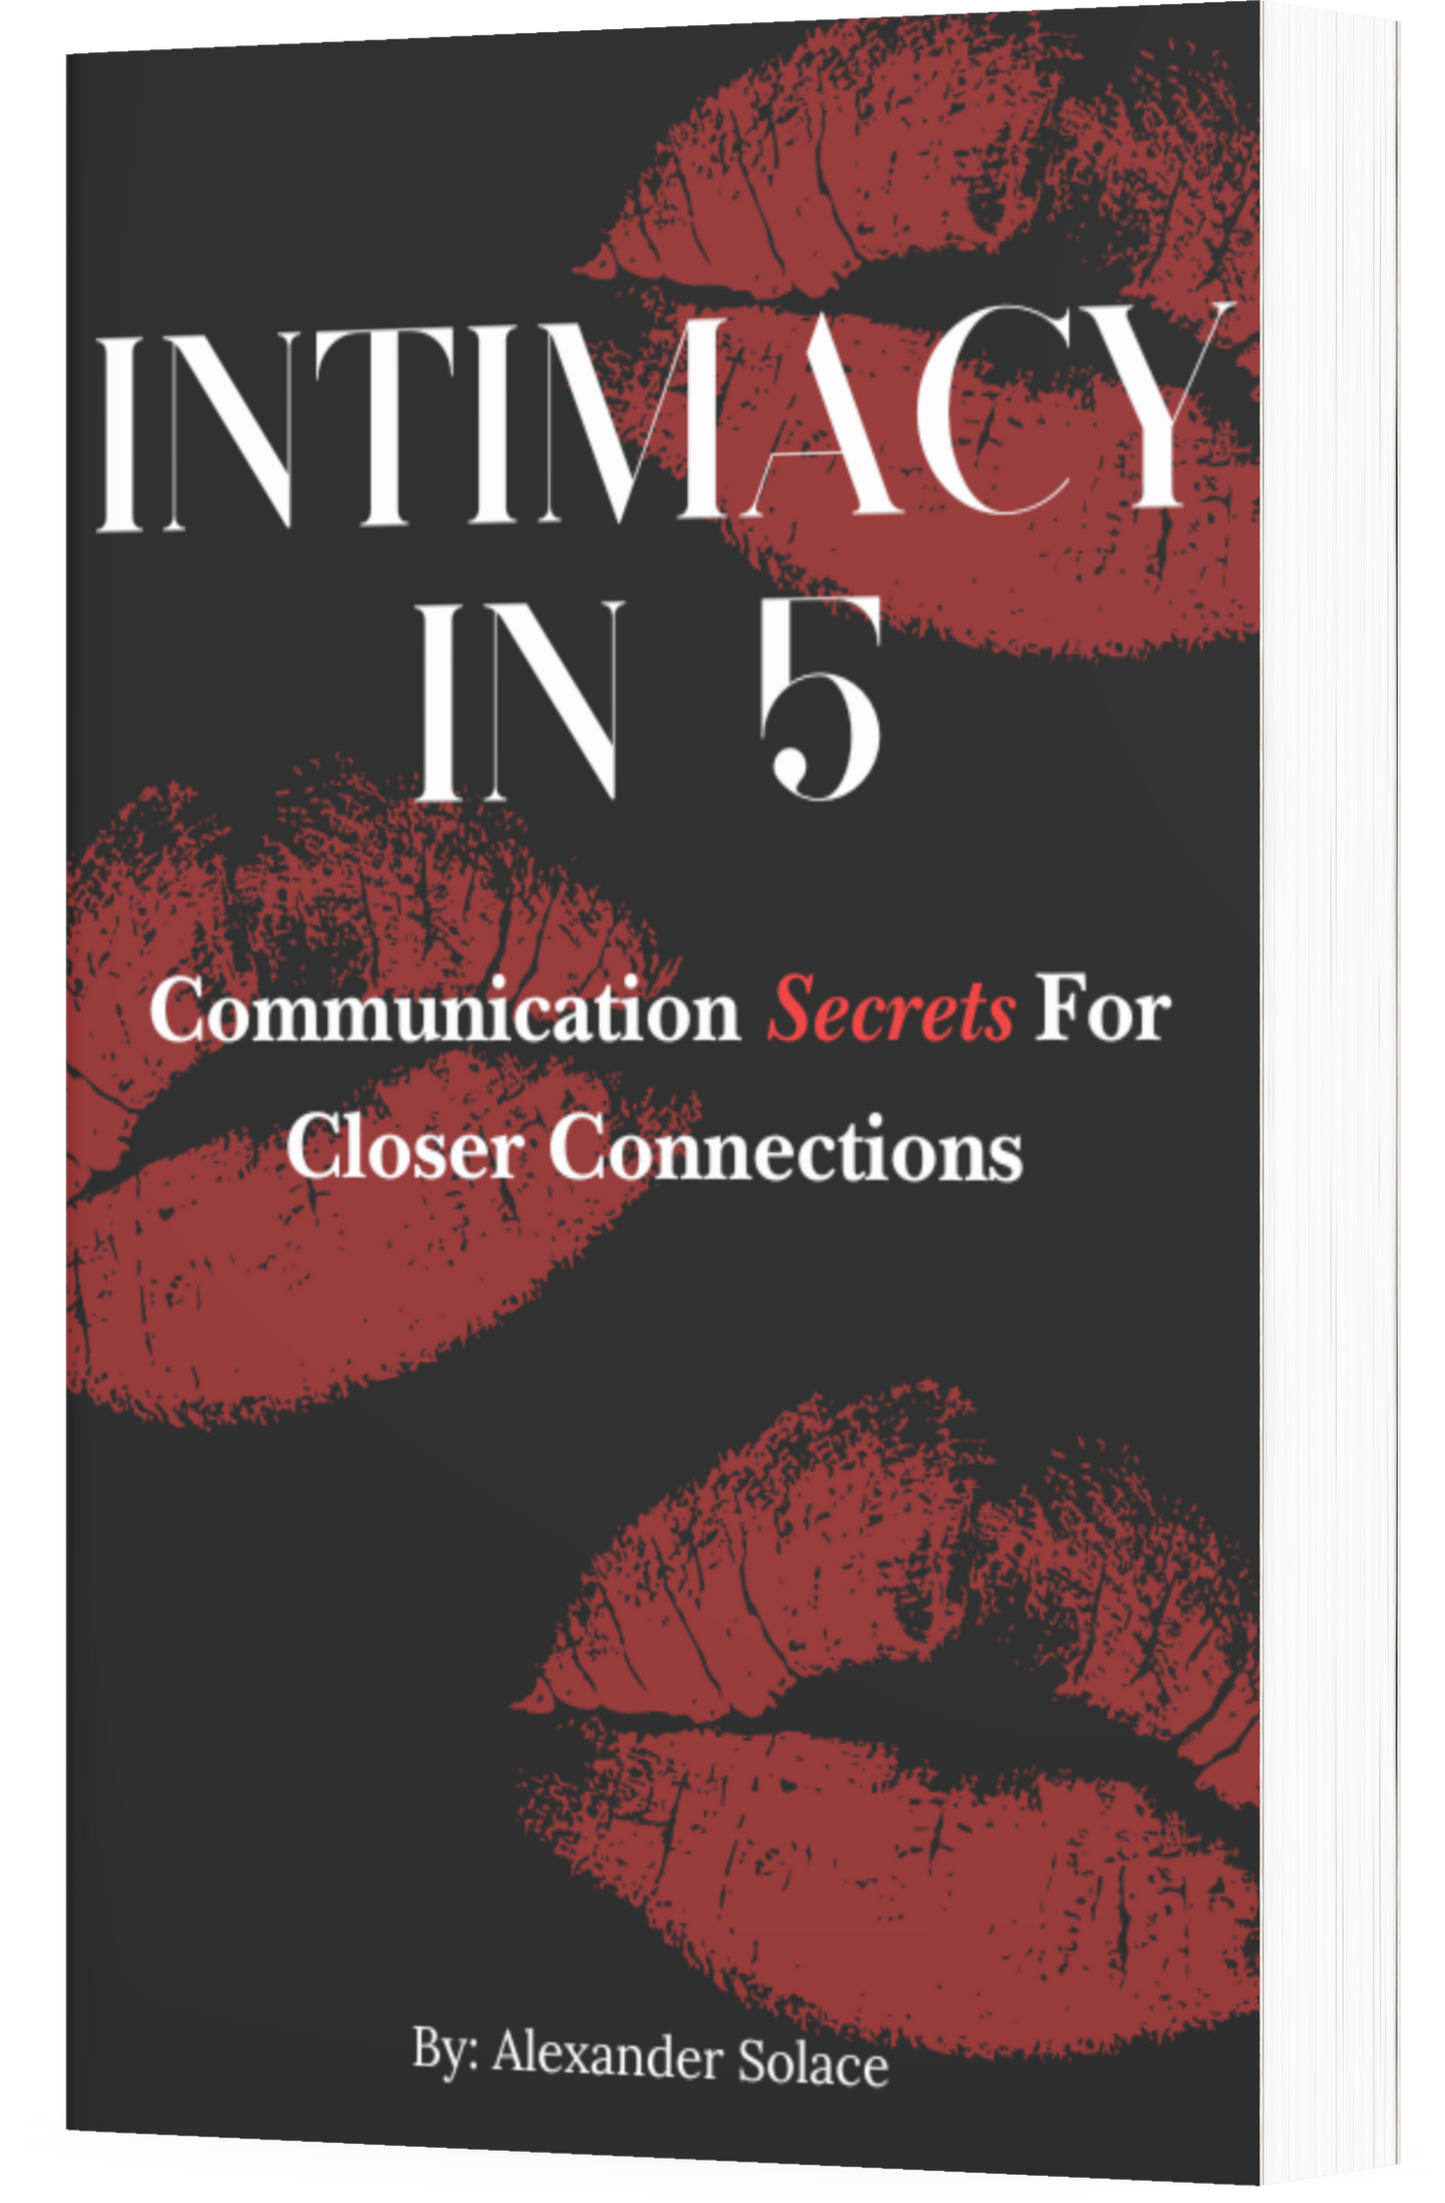 Intimacy In 5: Communication Secrets For Closer Connection